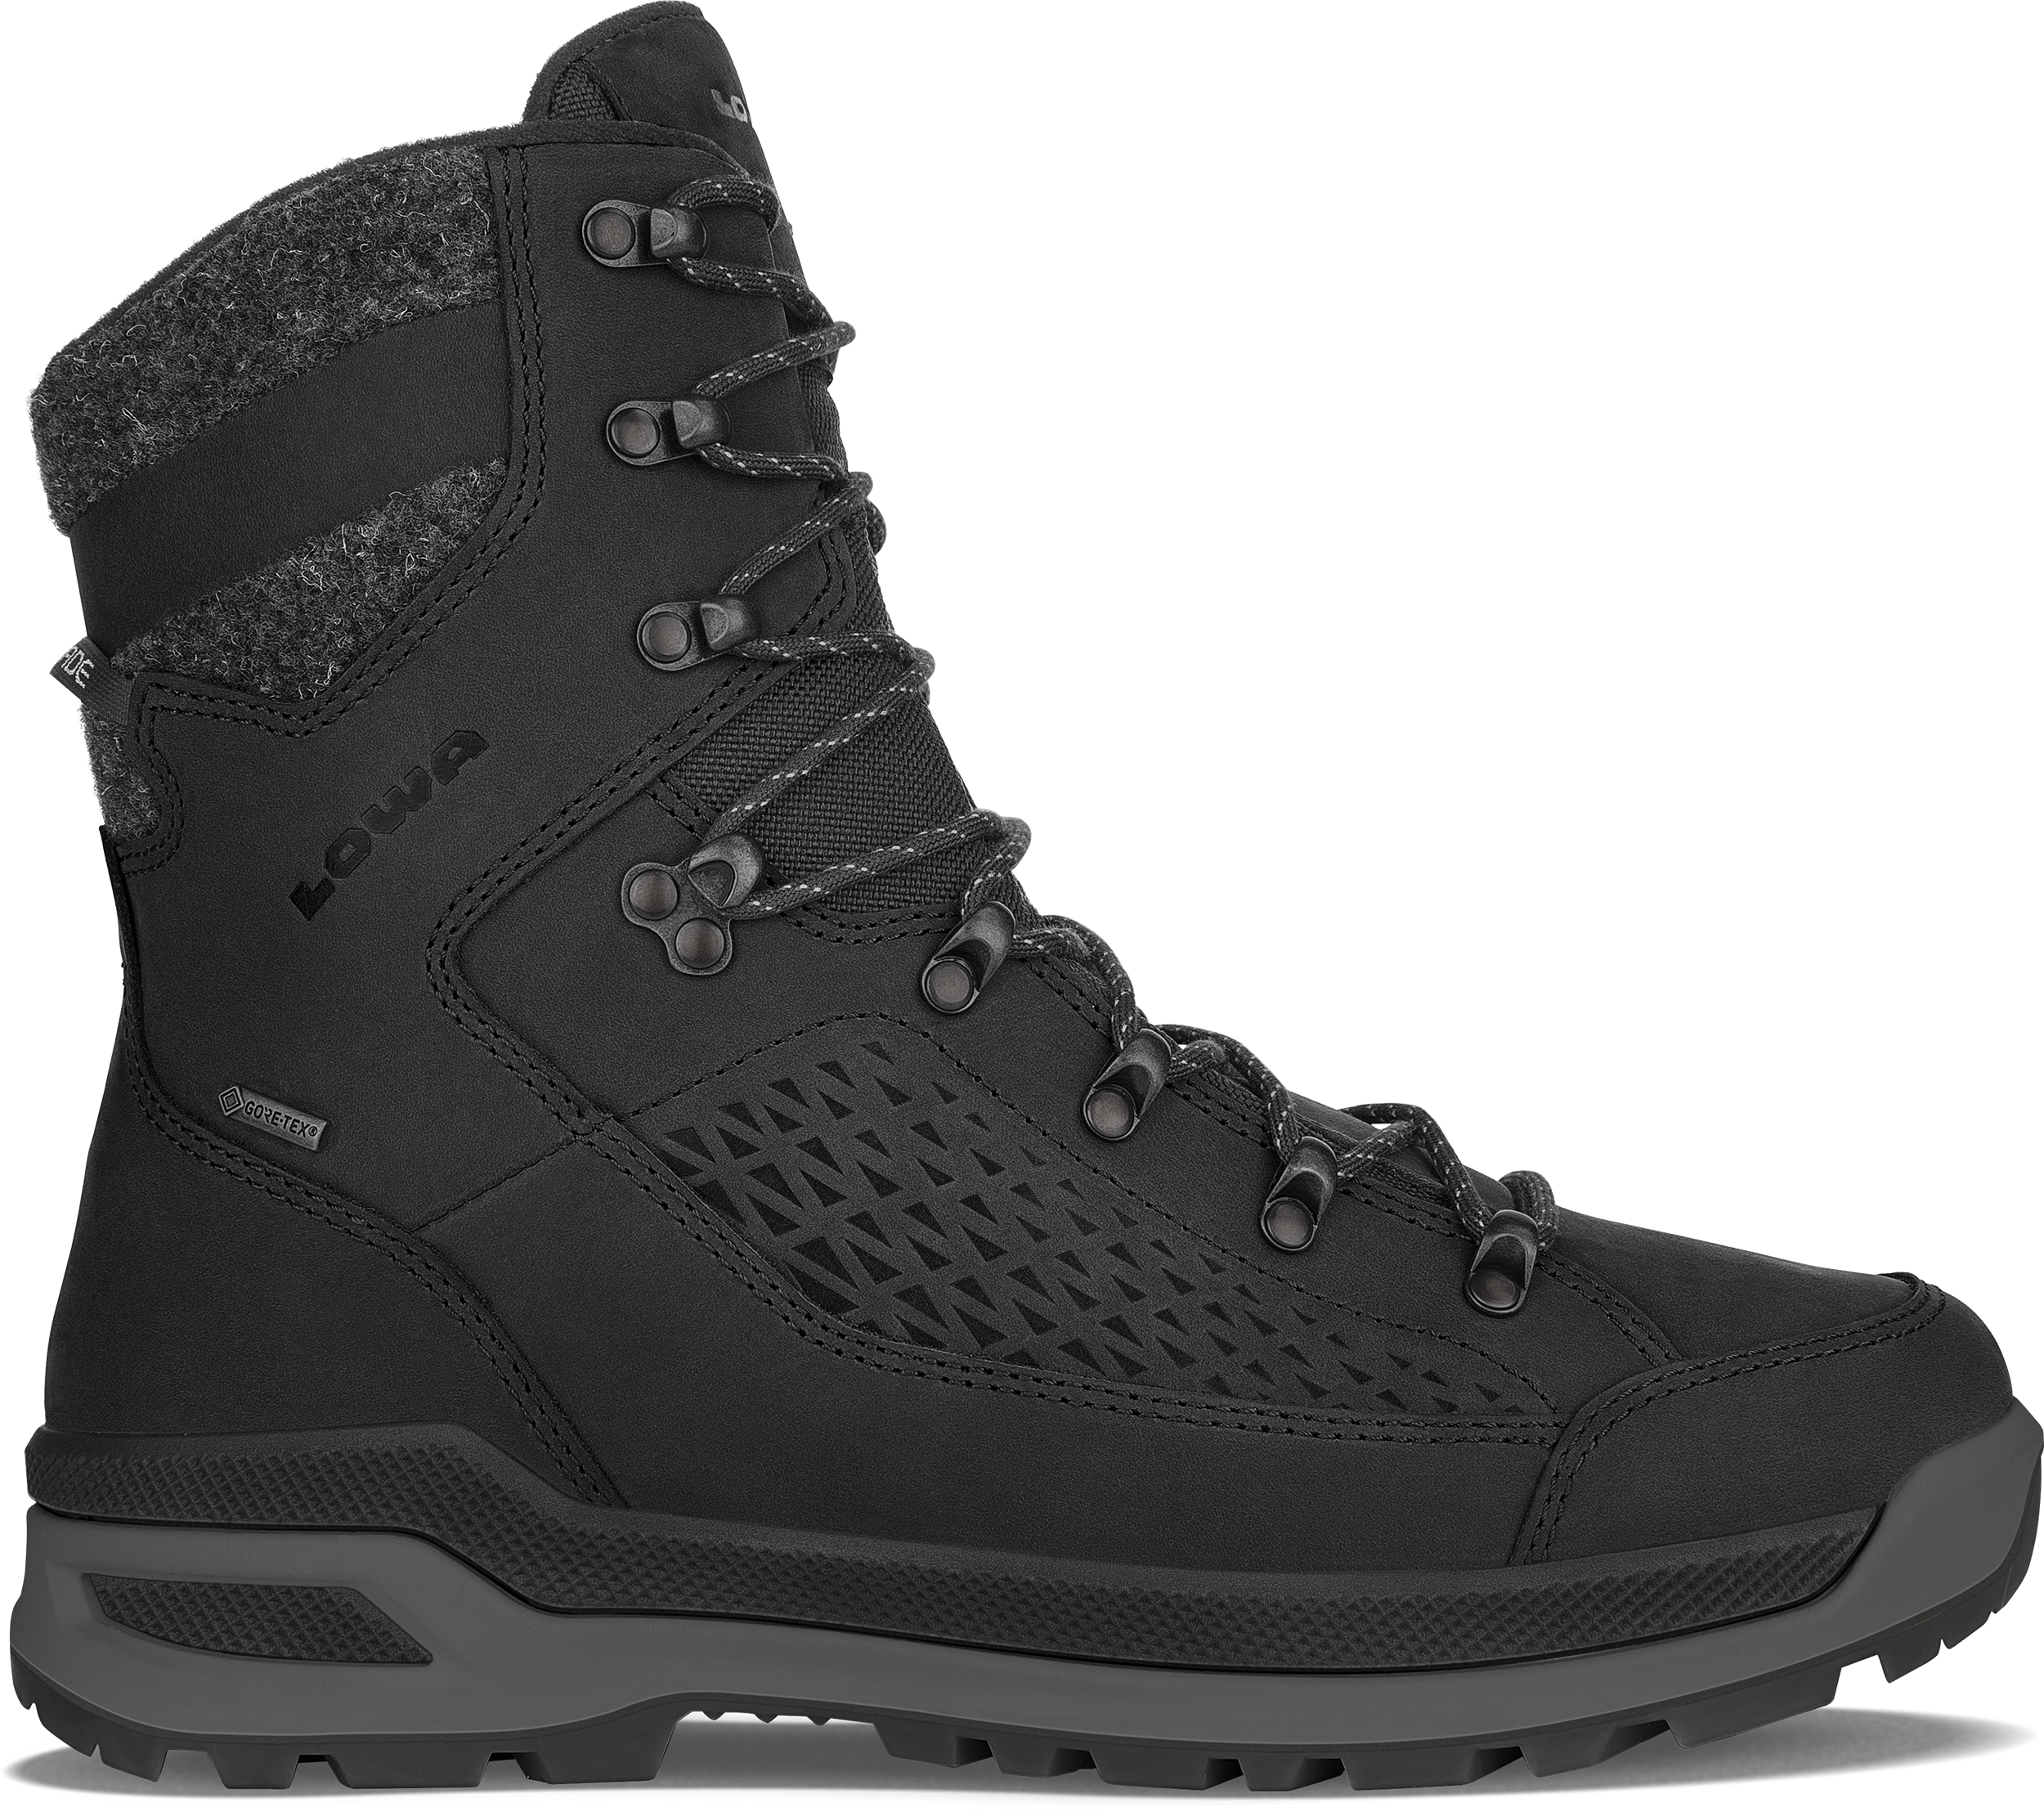 Bisschop storting palm RENEGADE EVO ICE GTX: COLD WEATHER BOOTS for men | LOWA FI